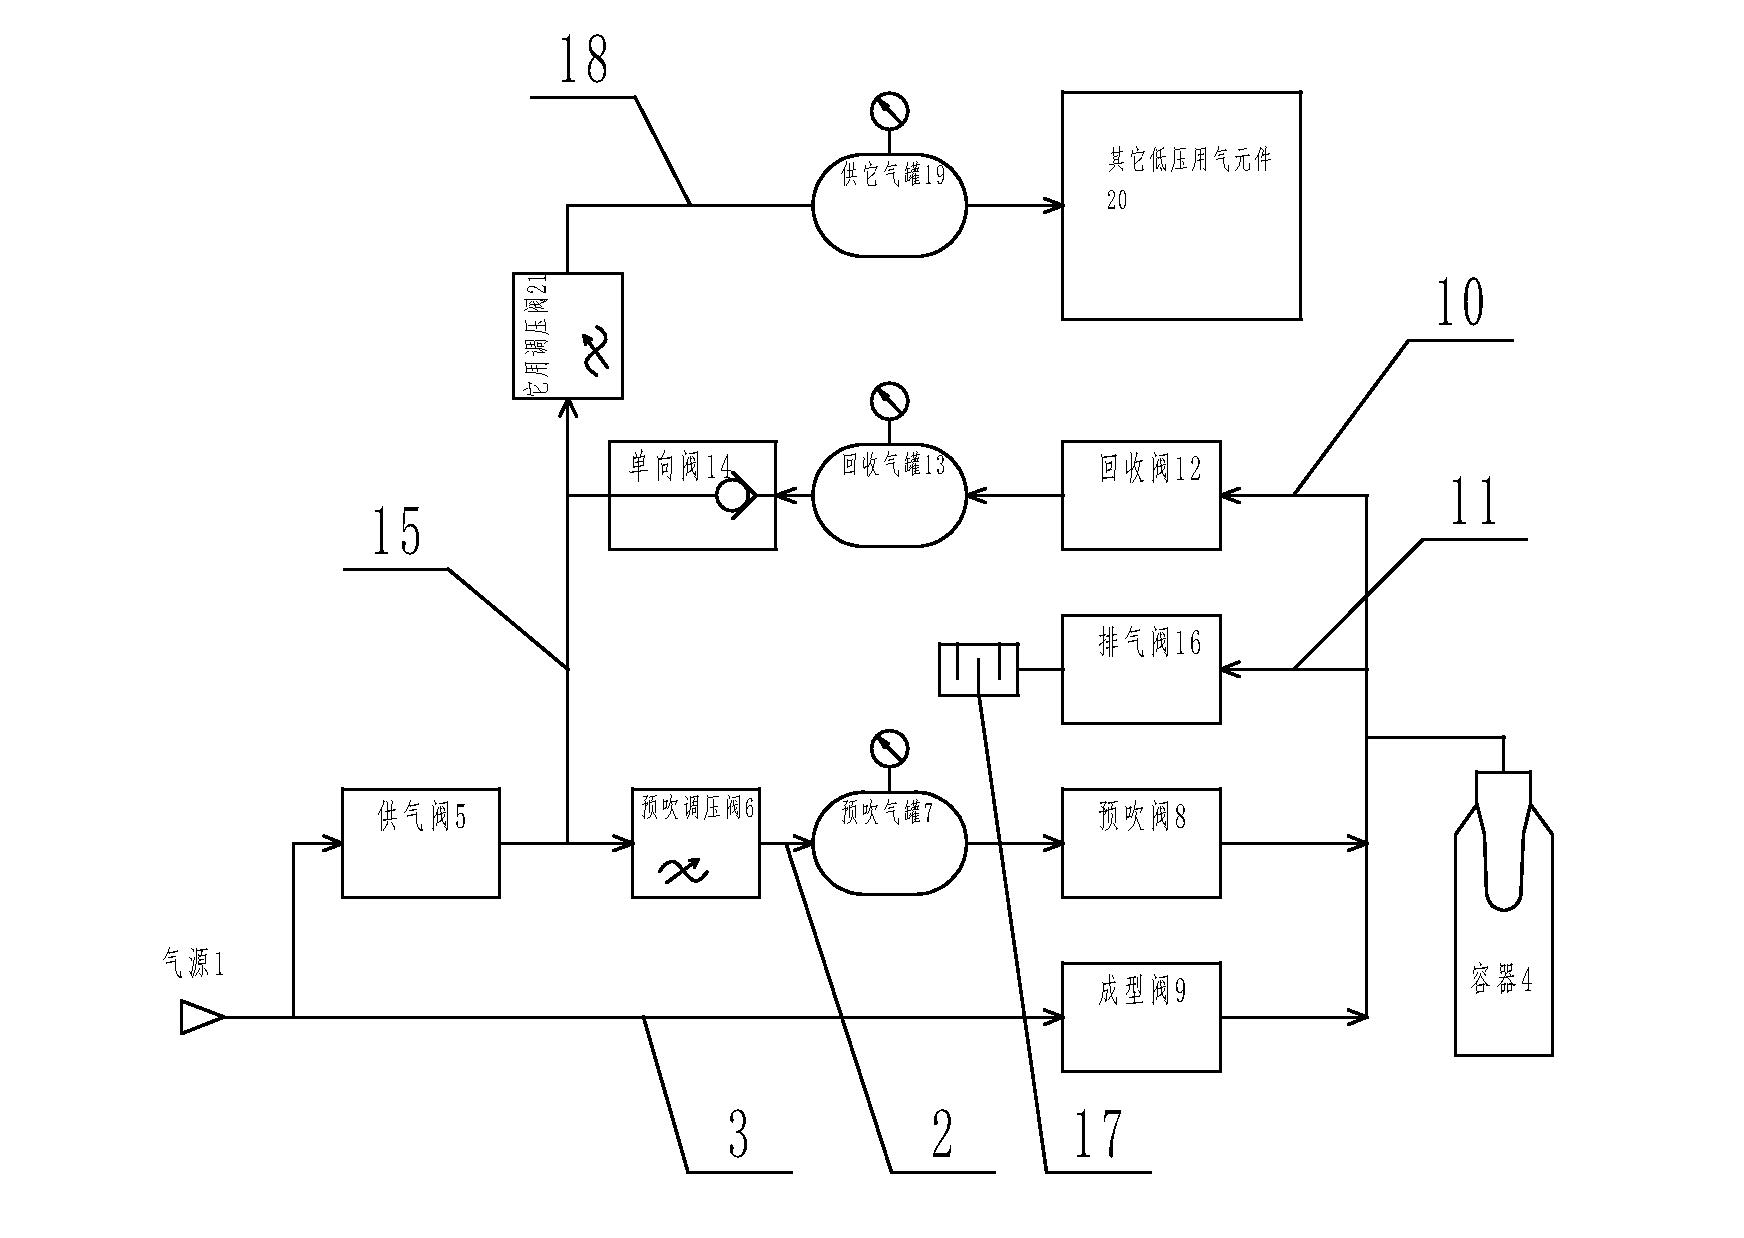 Control system for blow molding air channel